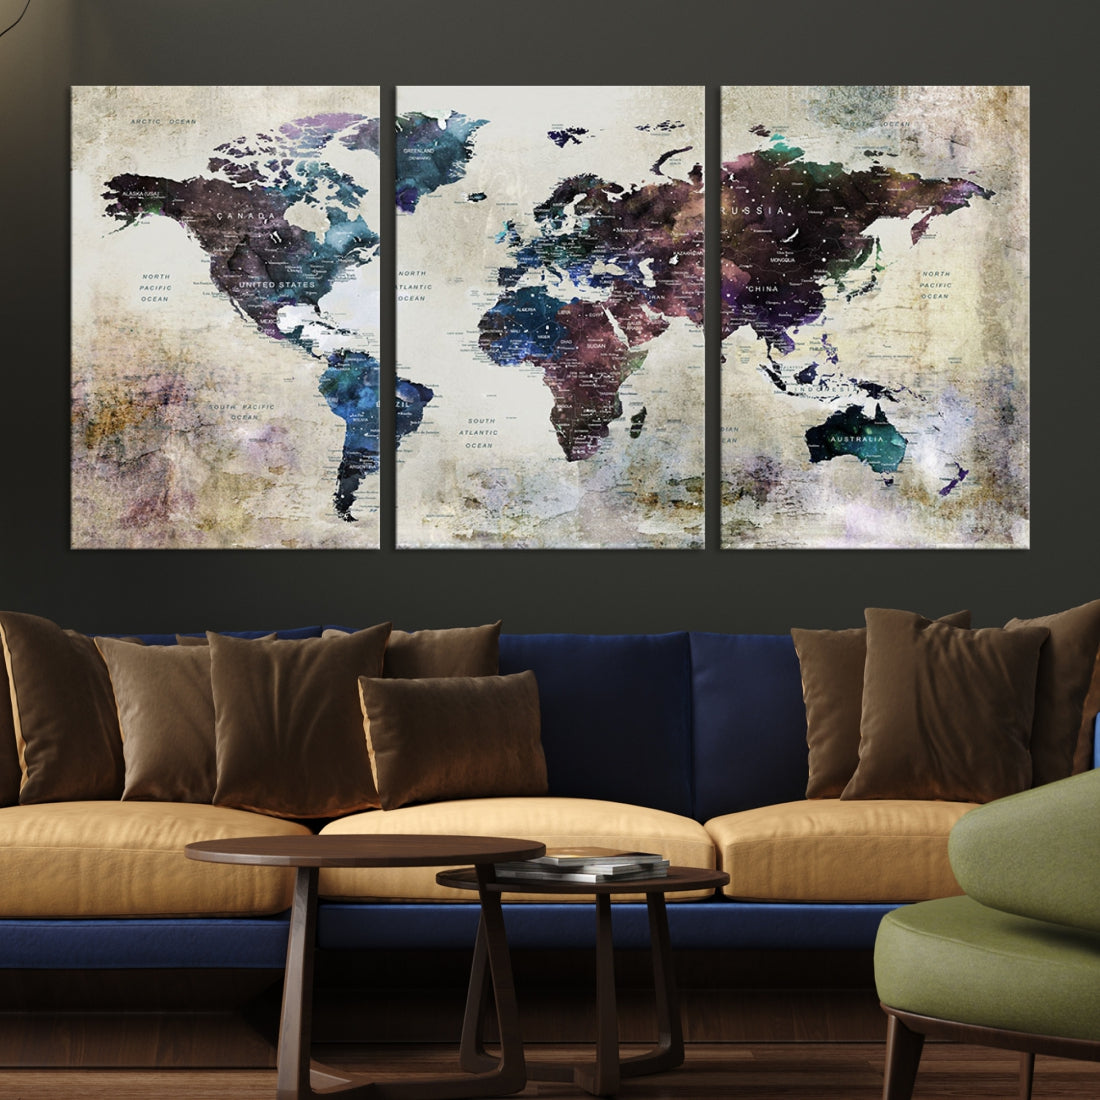 Dark Colored Vintage World Map Wall Art Print on Canvas for Living Room